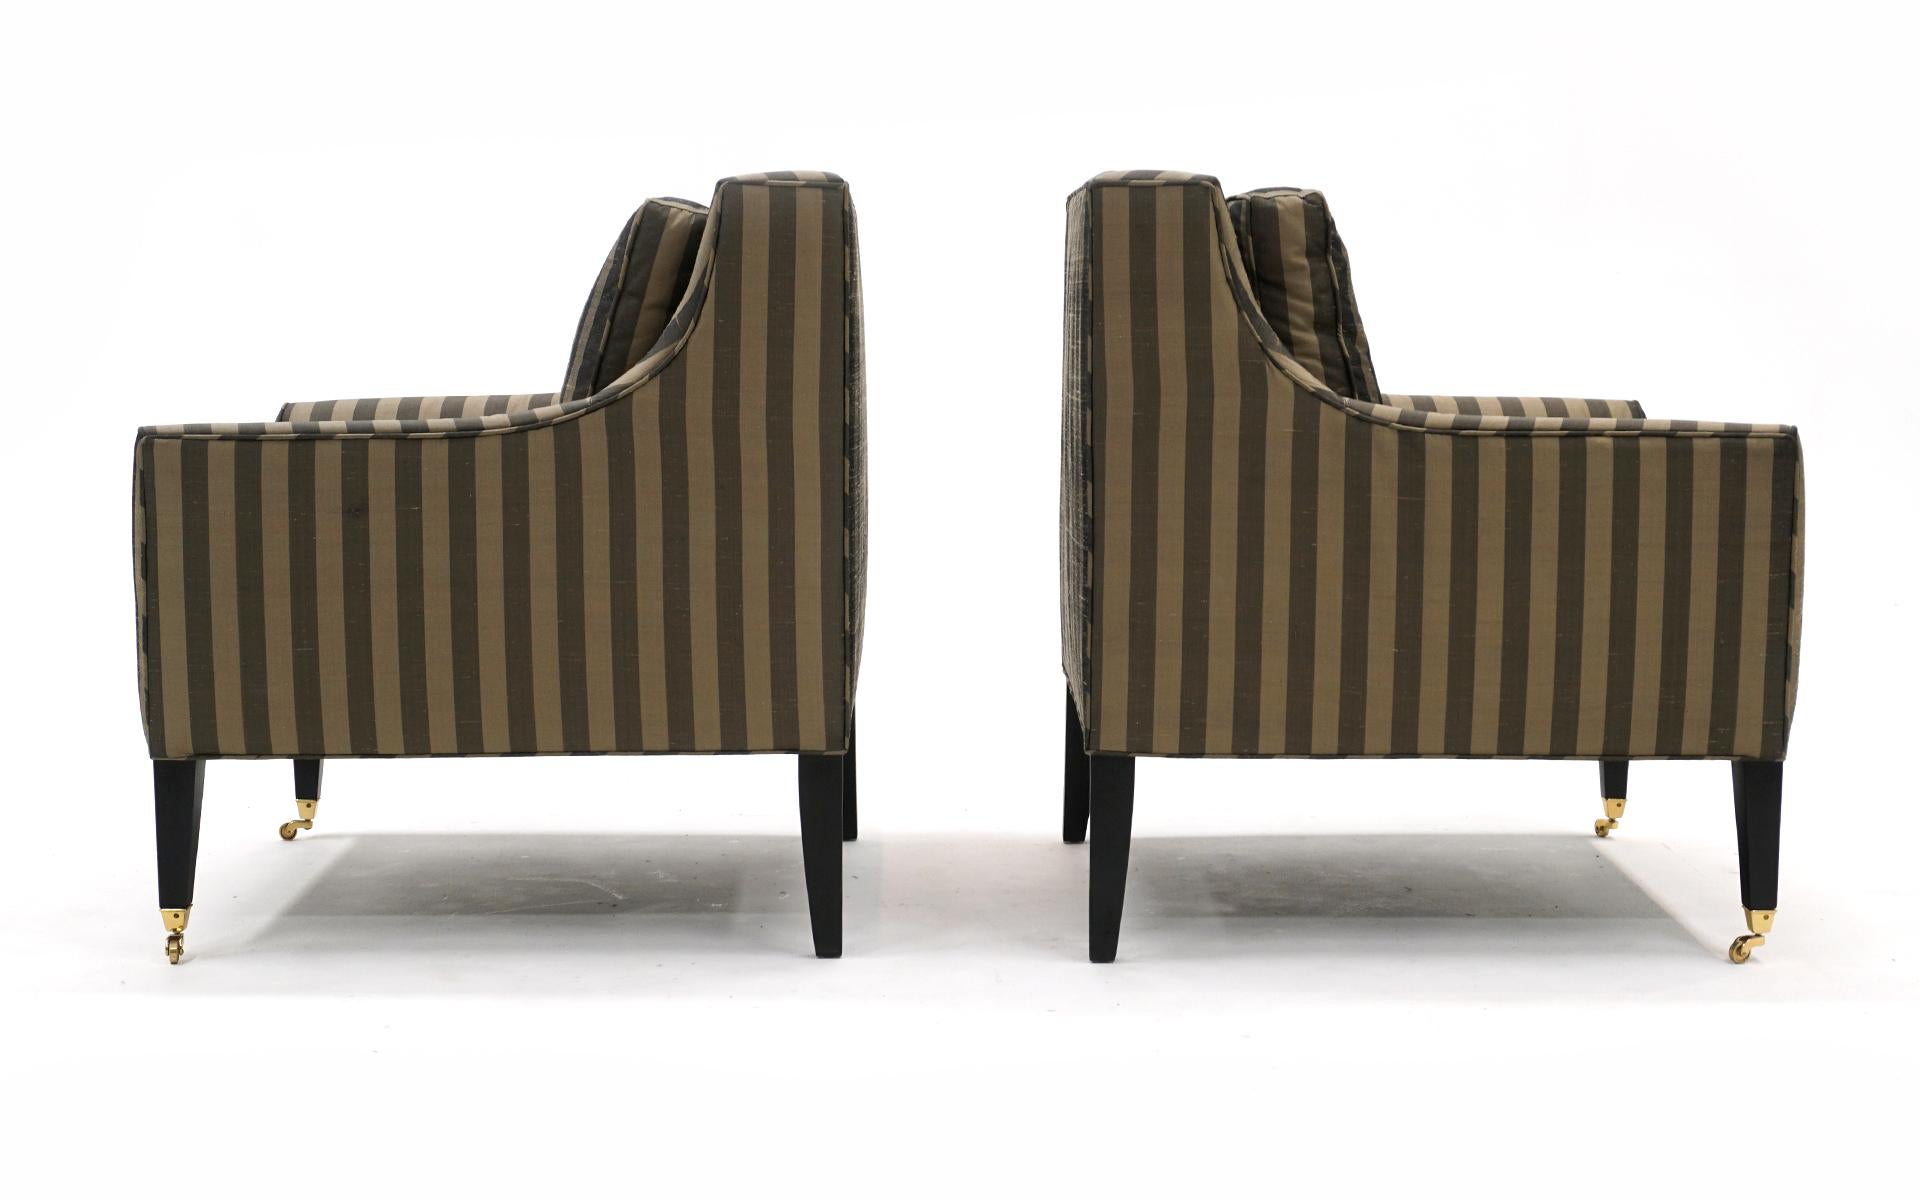 Pair of Lounge Chairs in Tan and Gray Stripes in the Style of Dunbar In Good Condition For Sale In Kansas City, MO